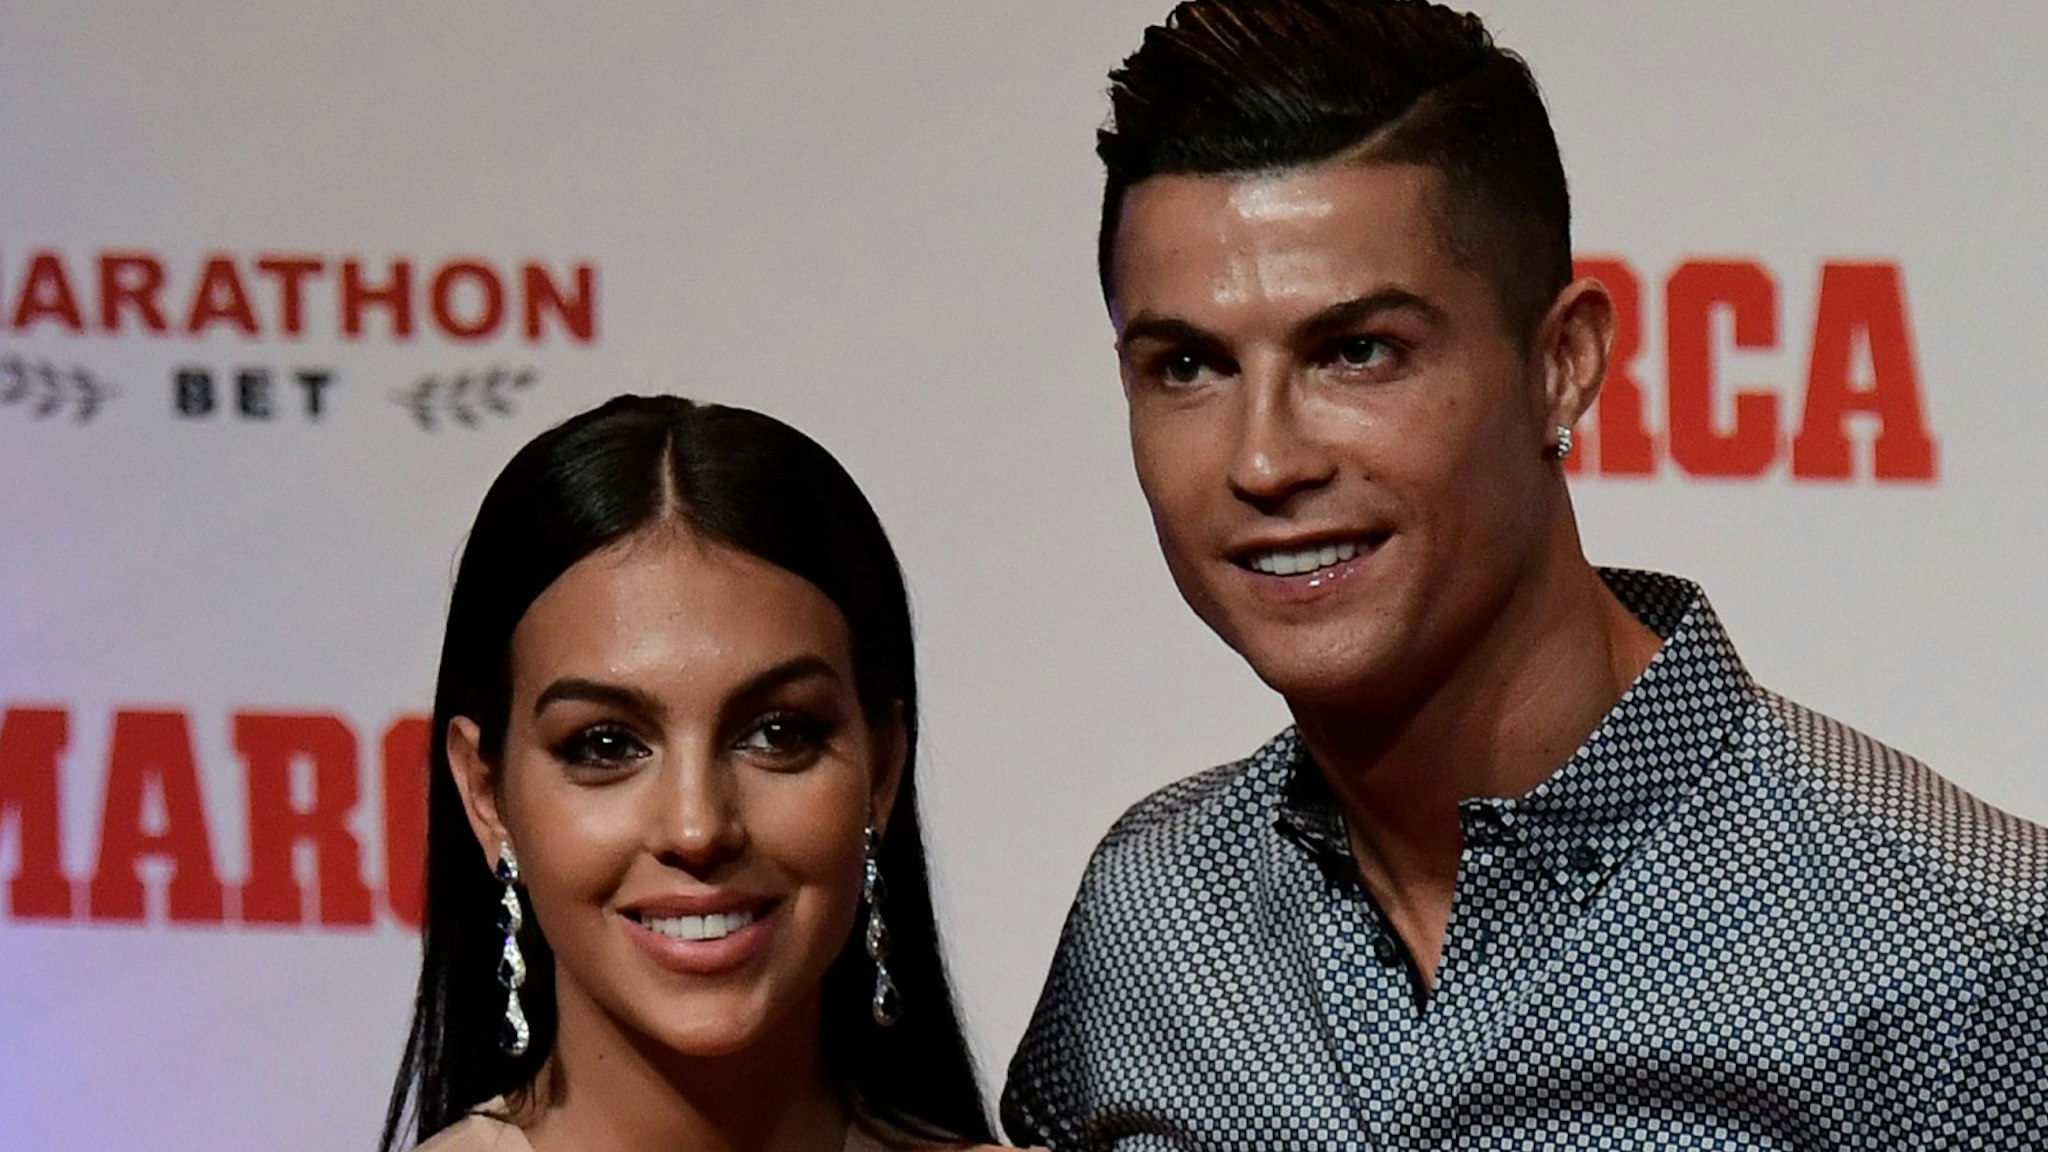 Portugal and Juventus forward Cristiano Ronaldo poses with his partner and Spanish model Georgina Rodriguez (L) after receiving the MARCA Leyenda (MARCA Legend) award in Madrid on July 29, 2019. - The award is attributed to sport professionals by the Spanish sports newspaper MARCA.